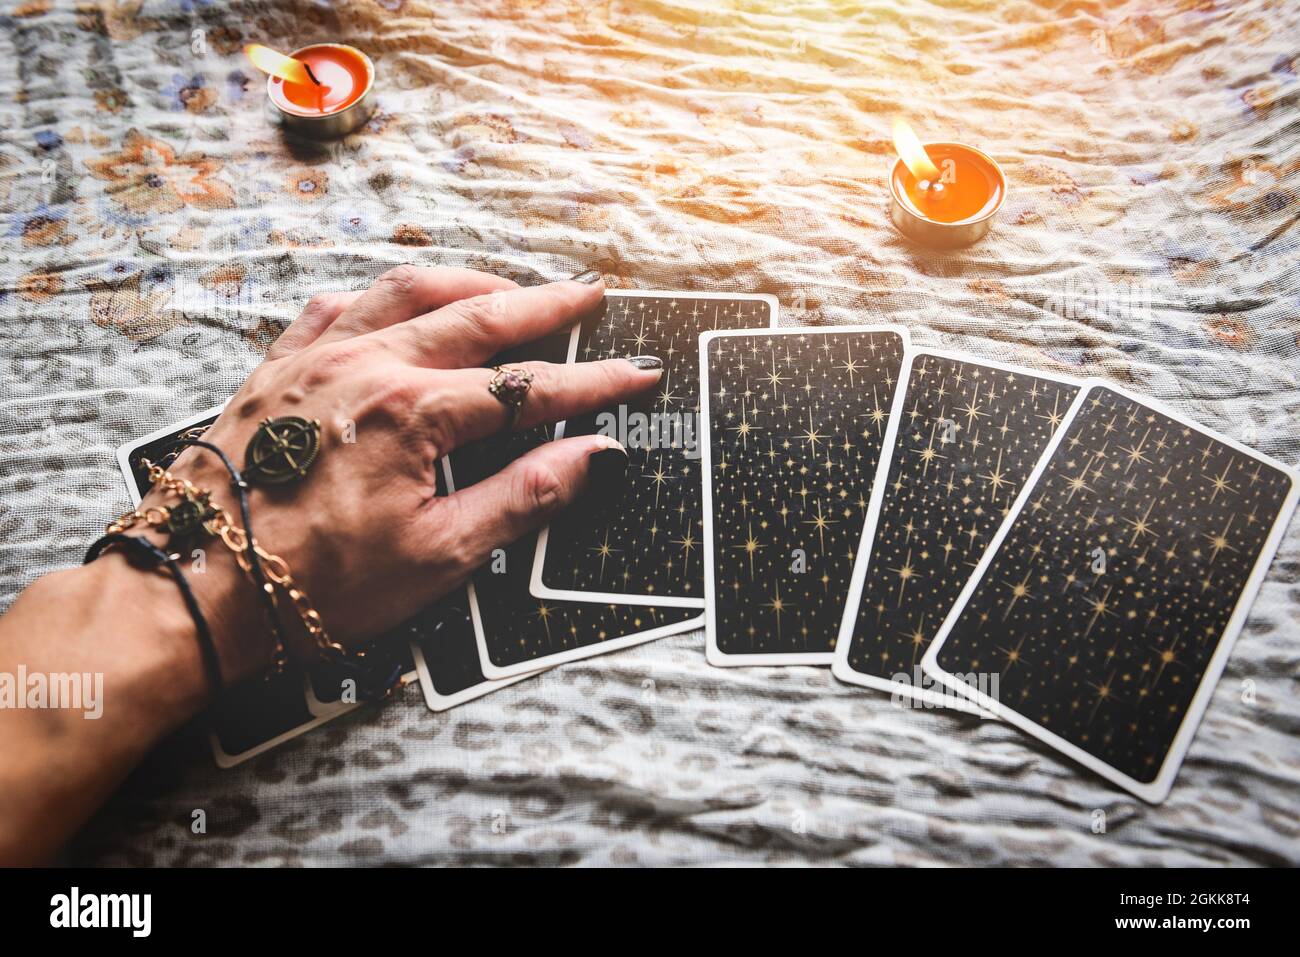 Show fortune tellers of hands holding tarot cards and tarot reader with candle light on the table, Performing readings magical performances, Things my Stock Photo